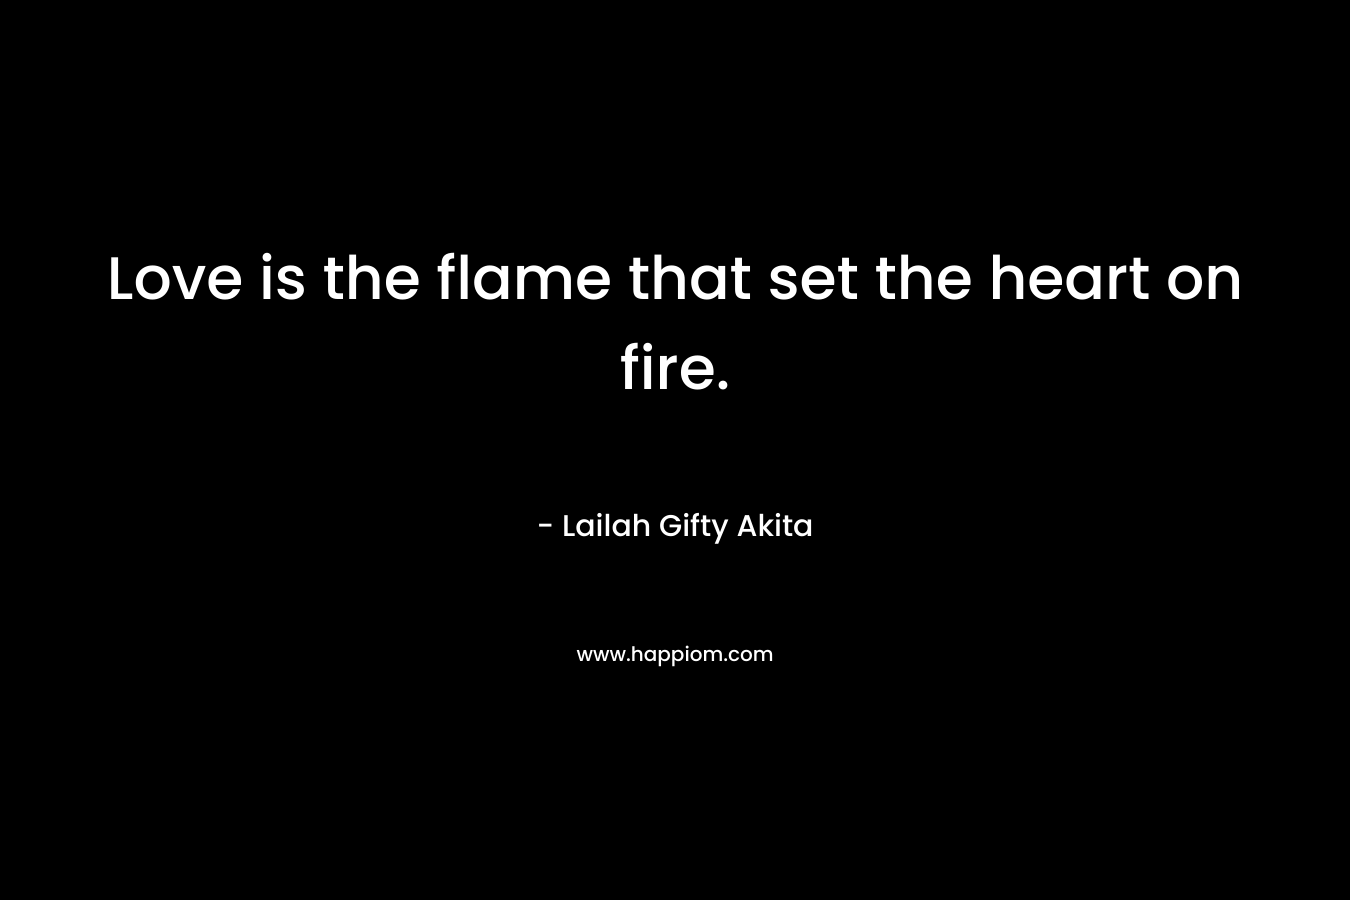 Love is the flame that set the heart on fire.